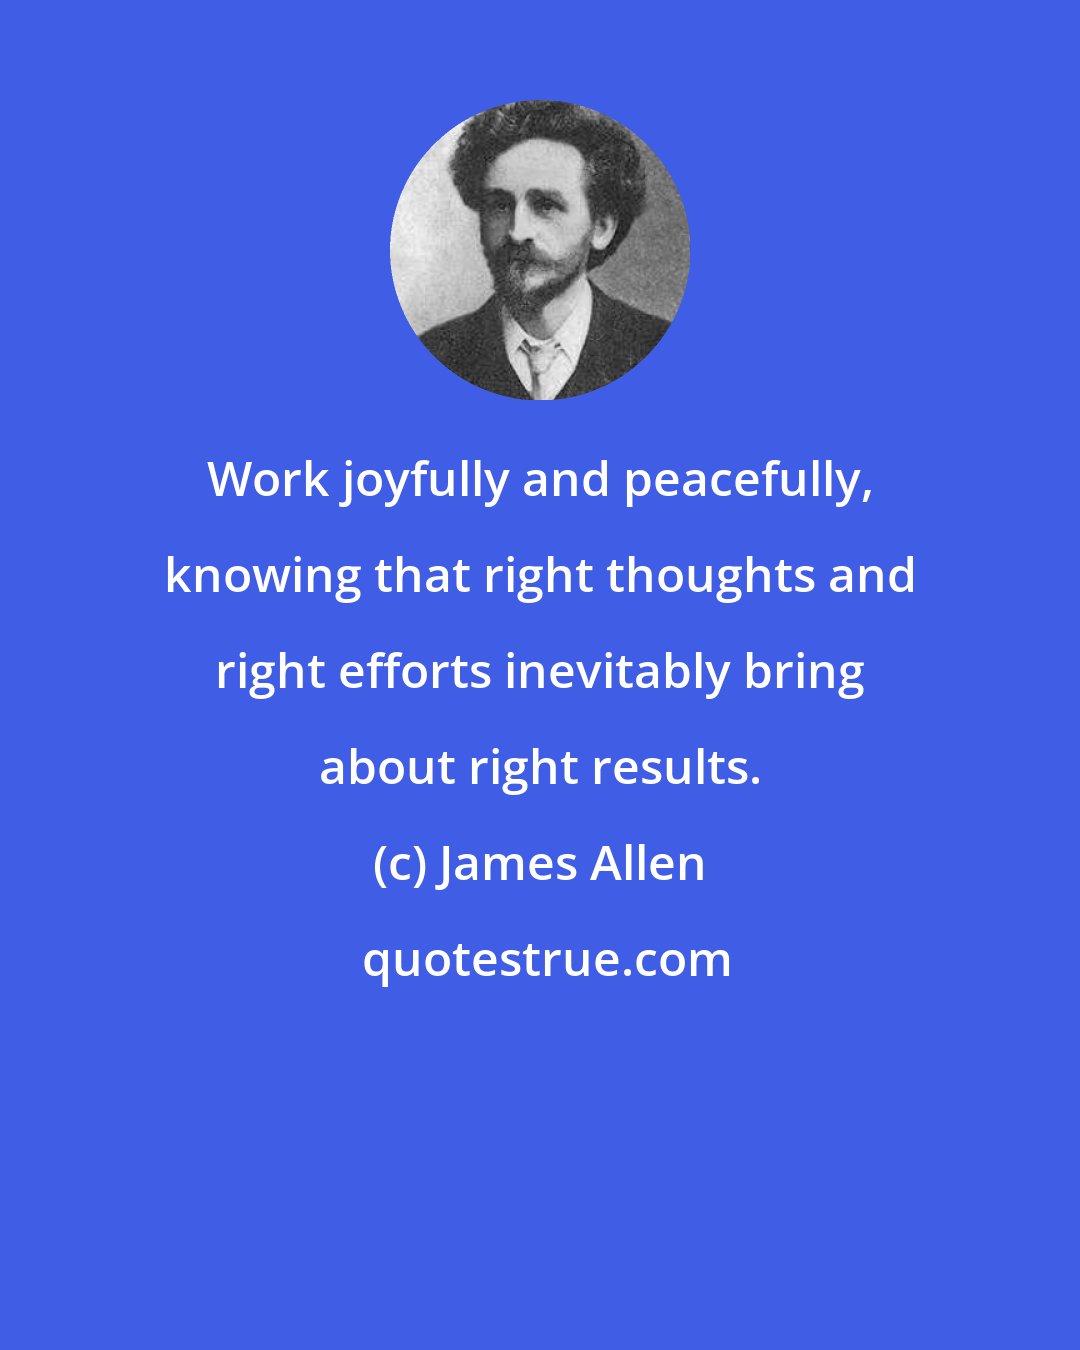 James Allen: Work joyfully and peacefully, knowing that right thoughts and right efforts inevitably bring about right results.